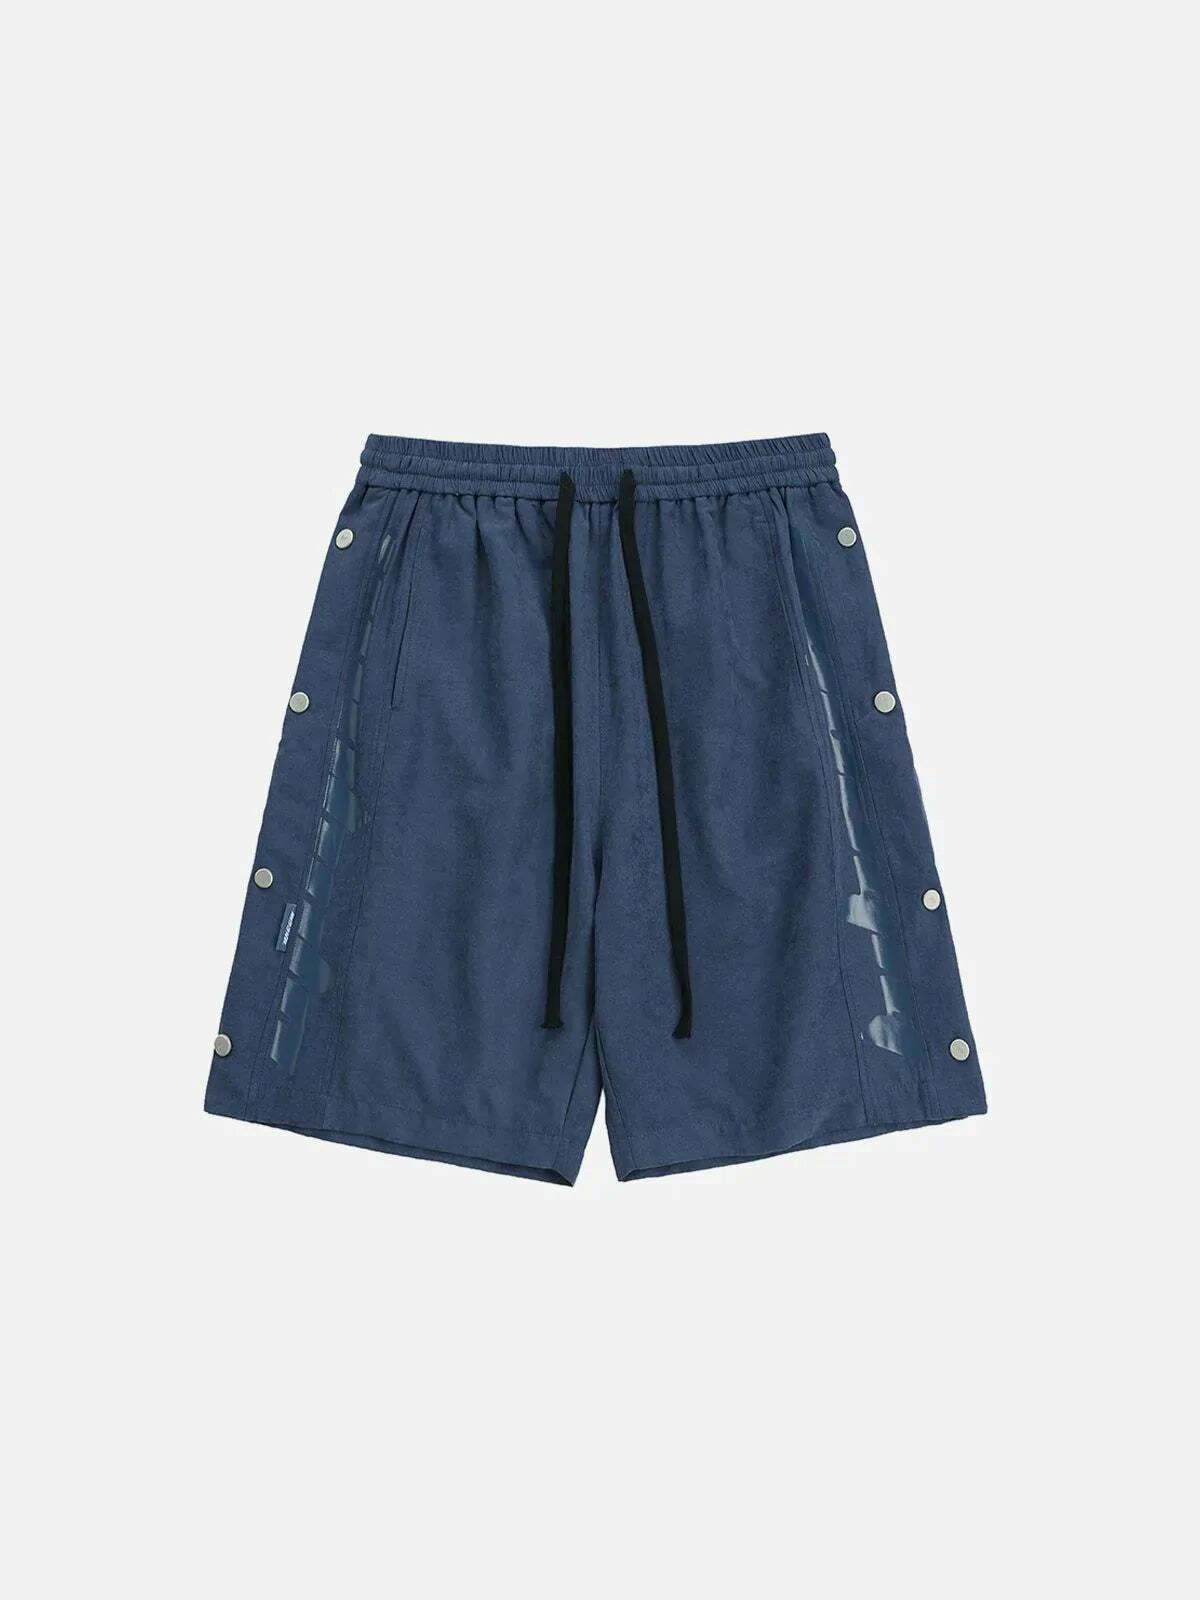 breasted cargo shorts edgy streetwear essential 4602